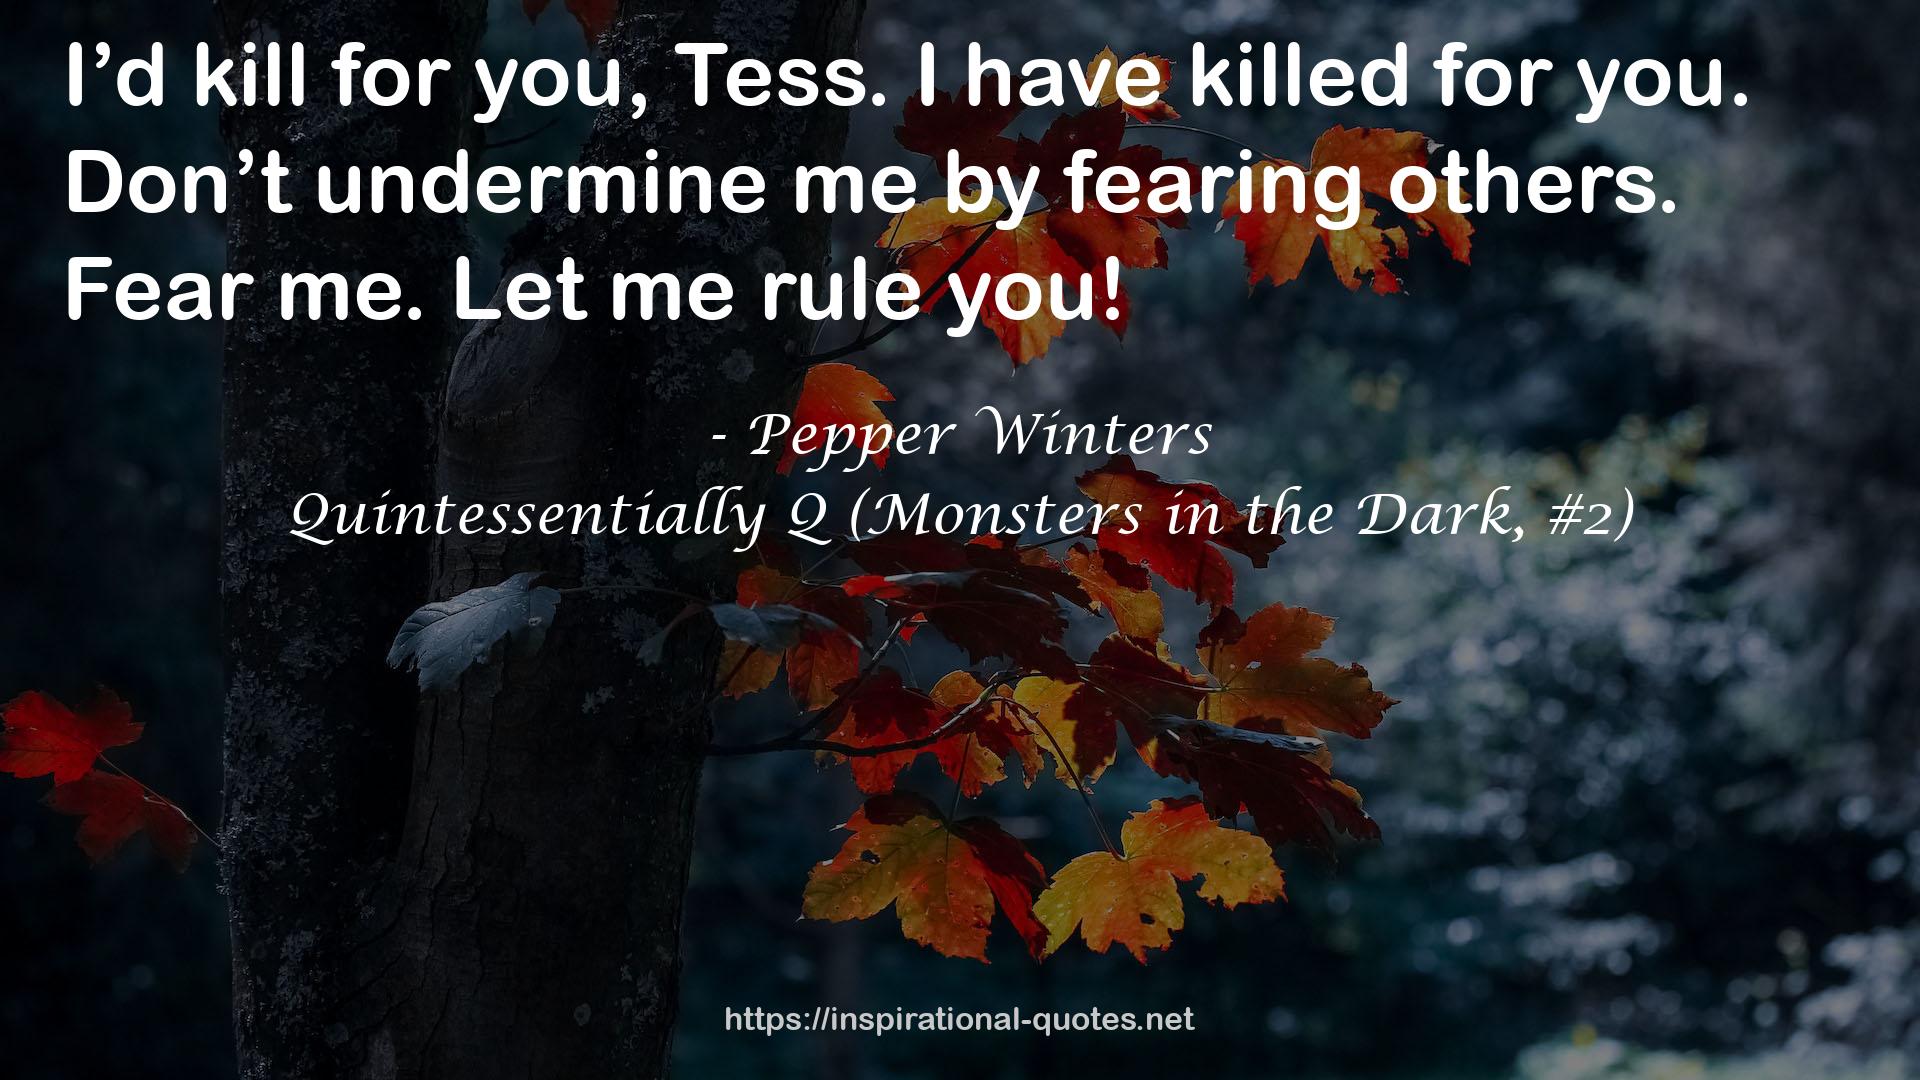 Quintessentially Q (Monsters in the Dark, #2) QUOTES